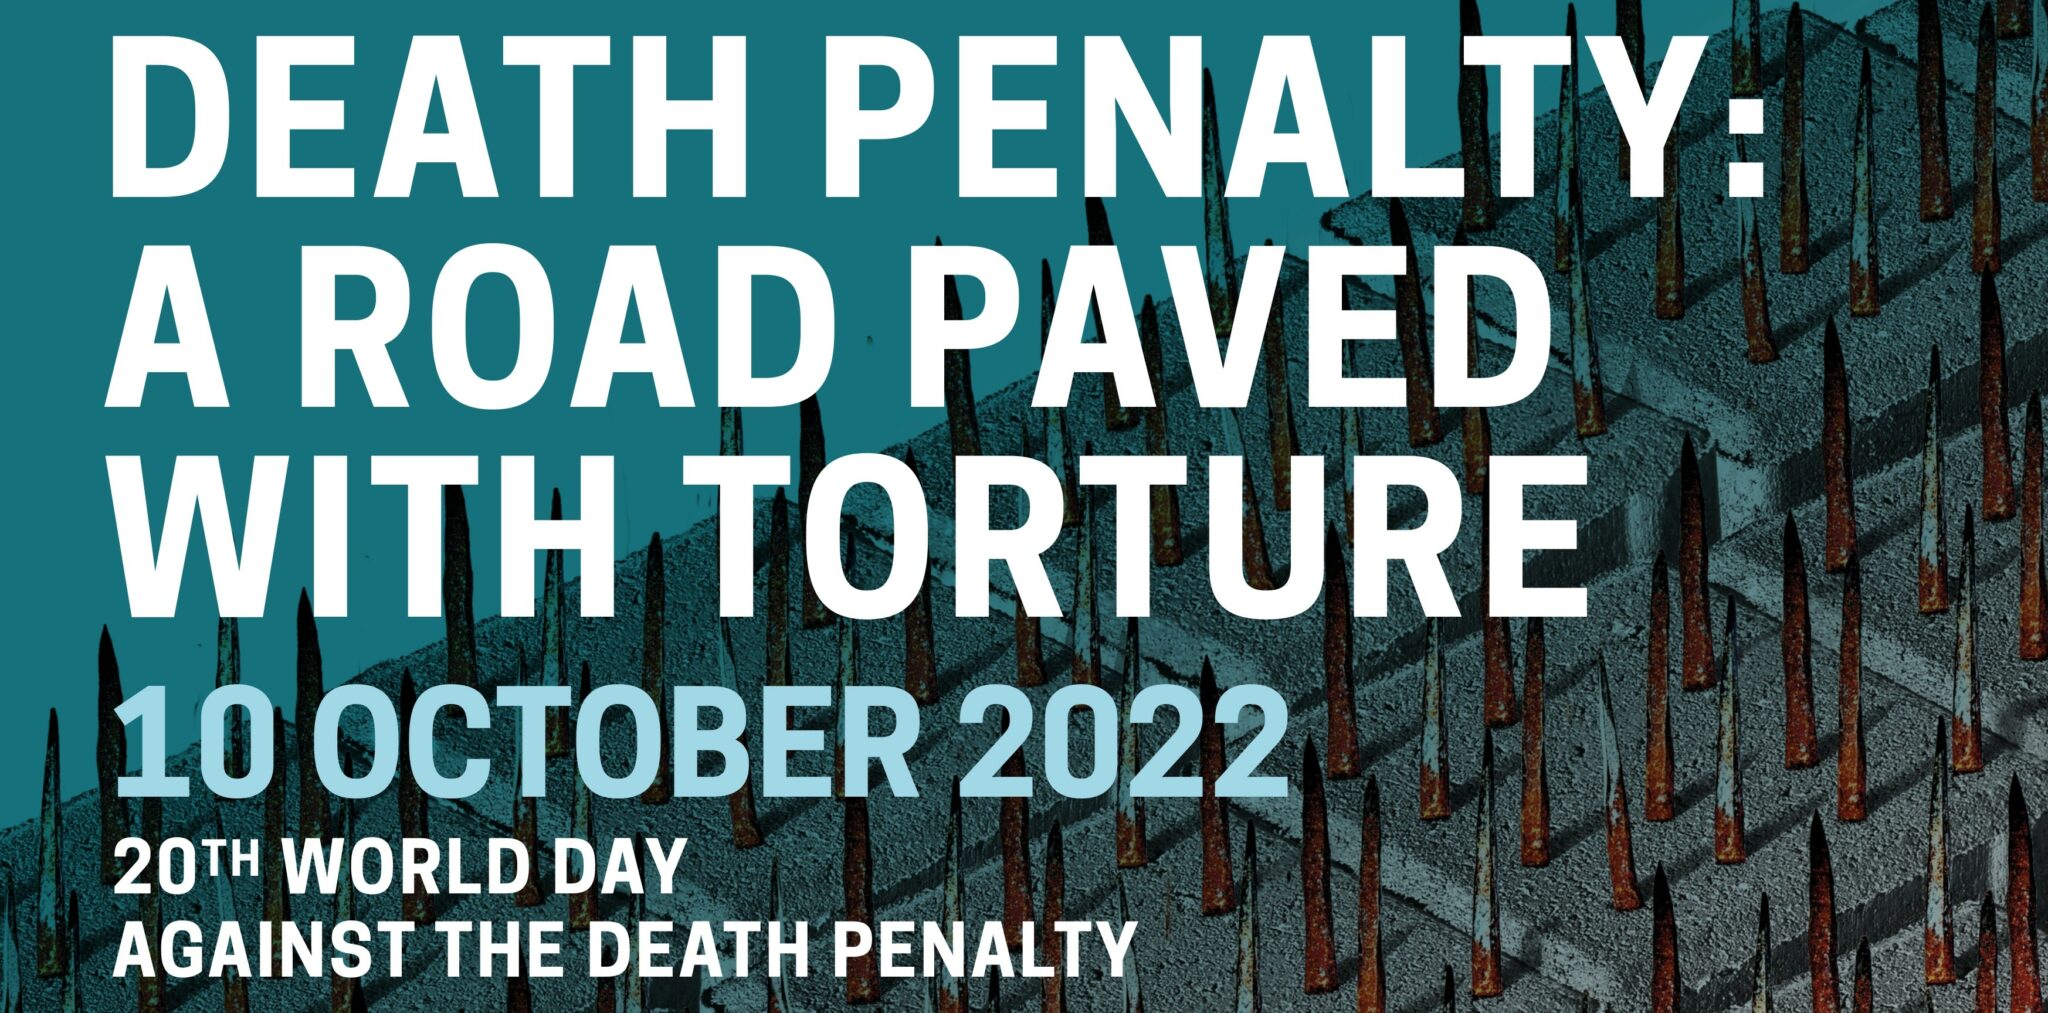 A Look Back at the 20th Anniversary of the World Day Against the Death Penalty